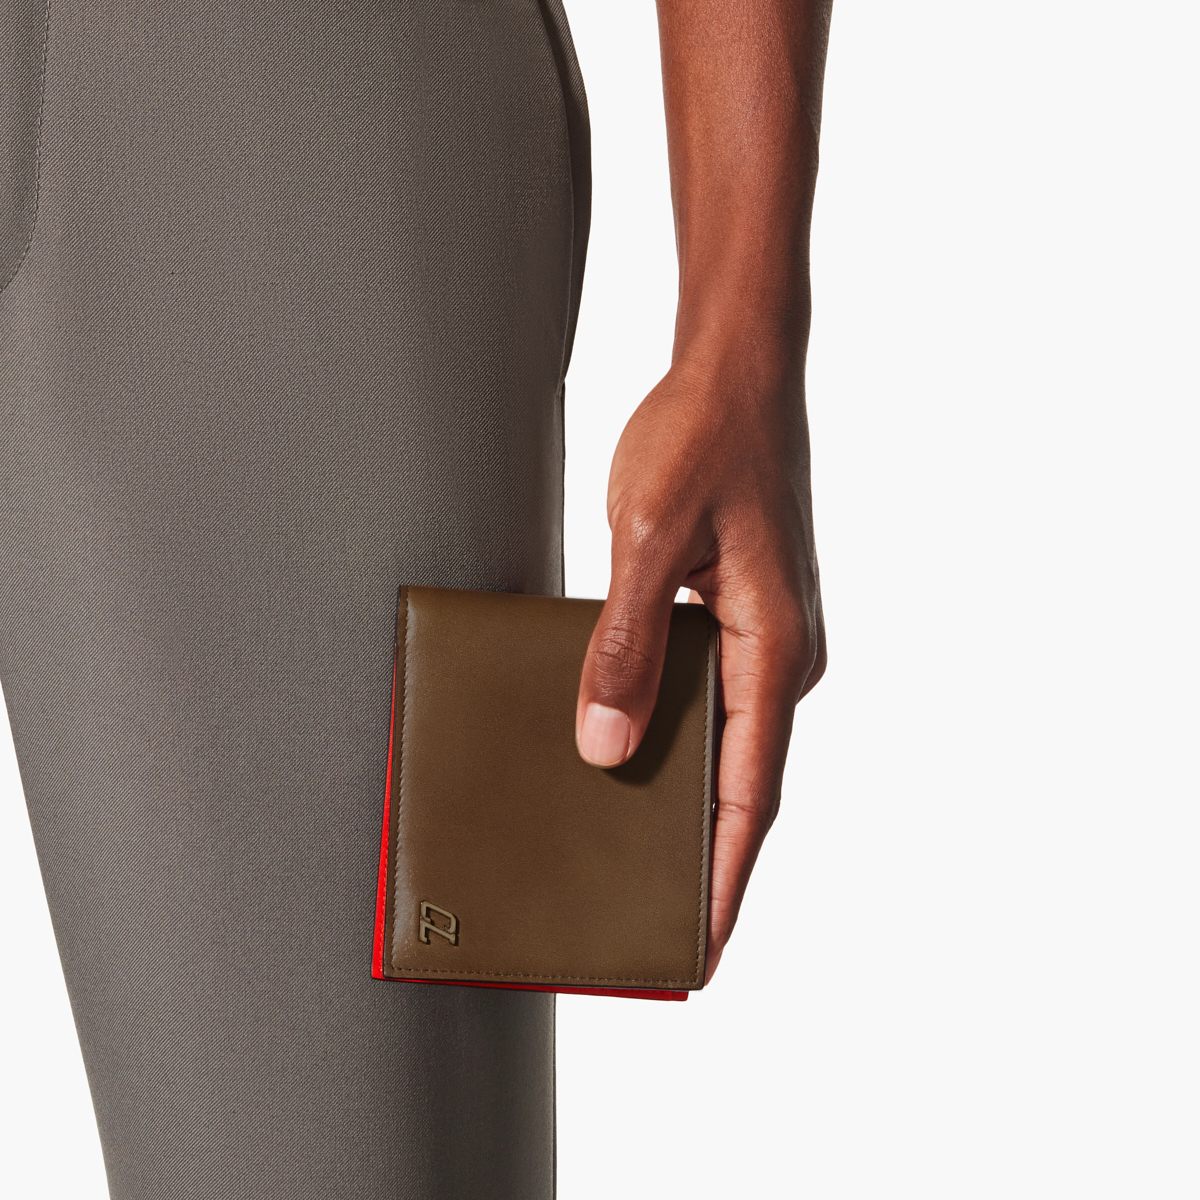 Coolcard - Wallet - Patinated calf leather - Roca - Christian Louboutin